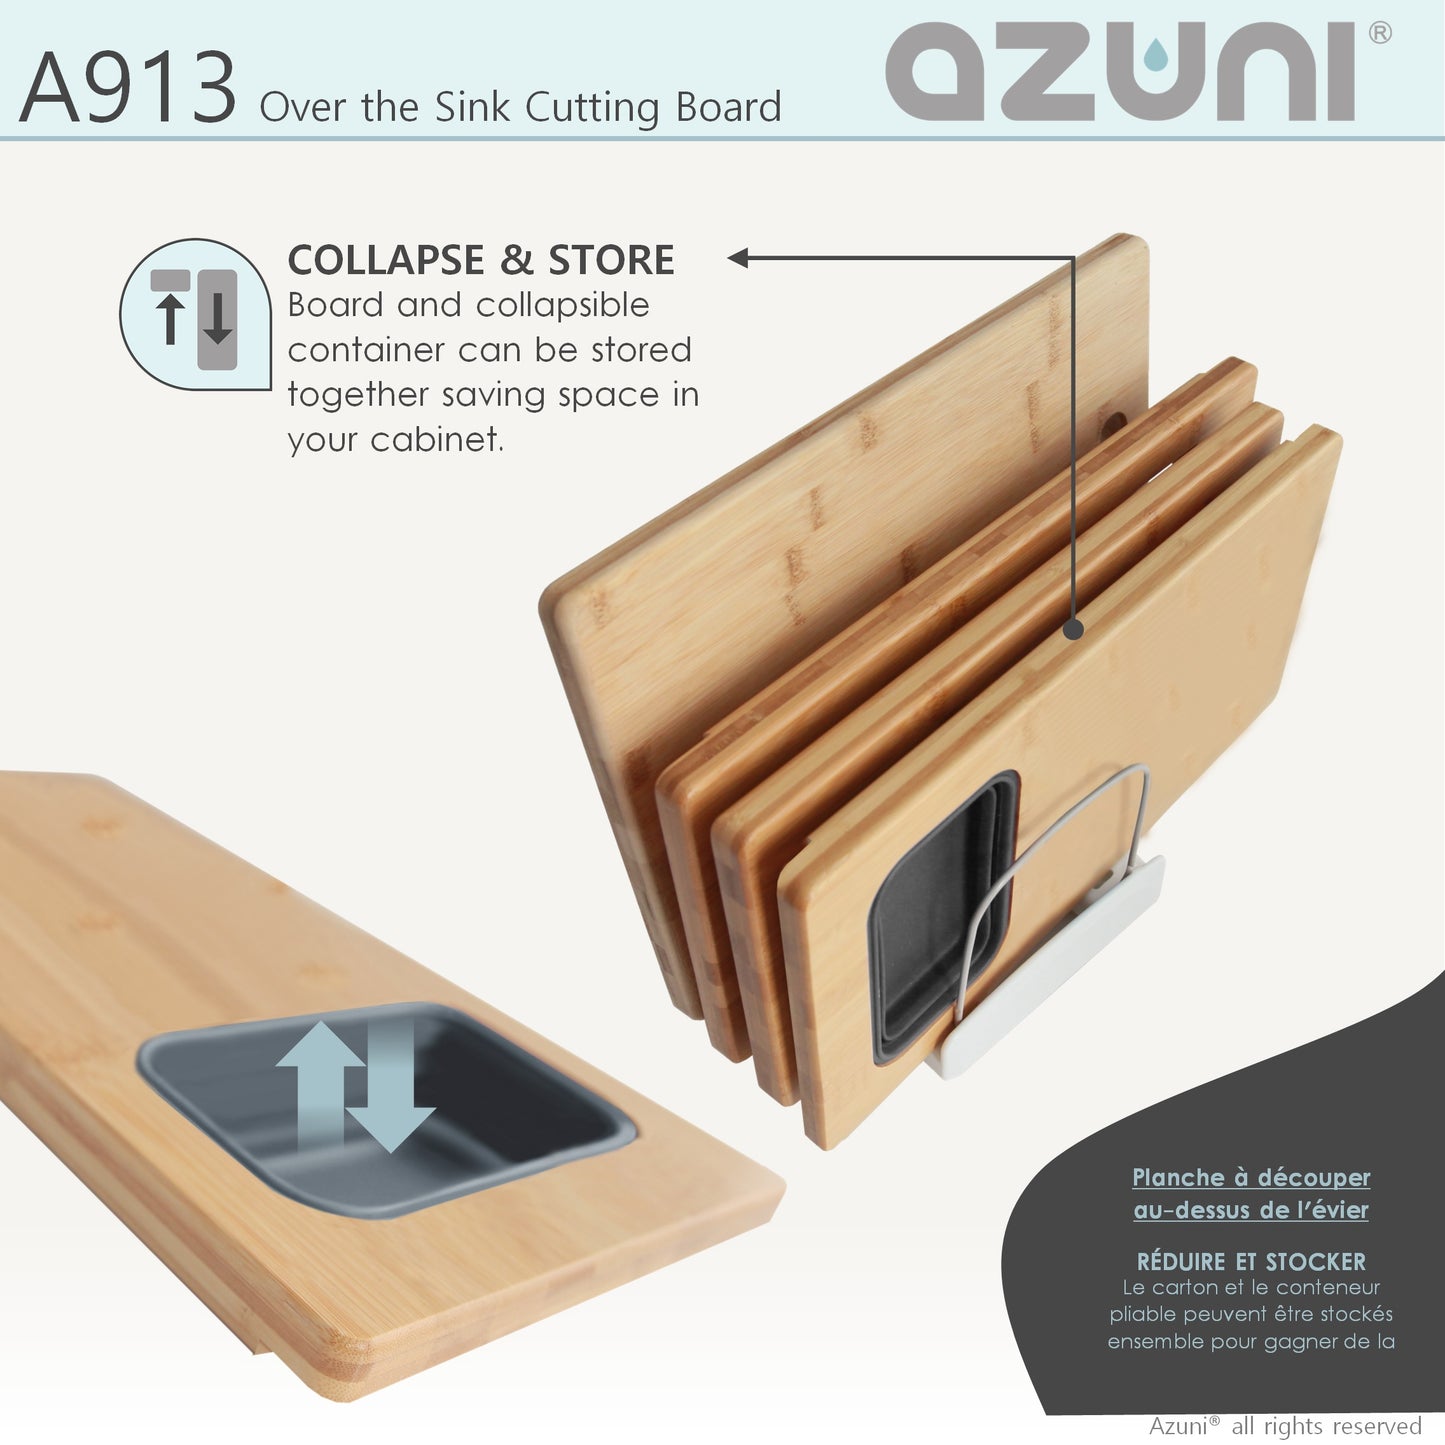 AZUNI 18 inch Kitchen Sink Bamboo Cutting Board set with 1 Collapsible Container